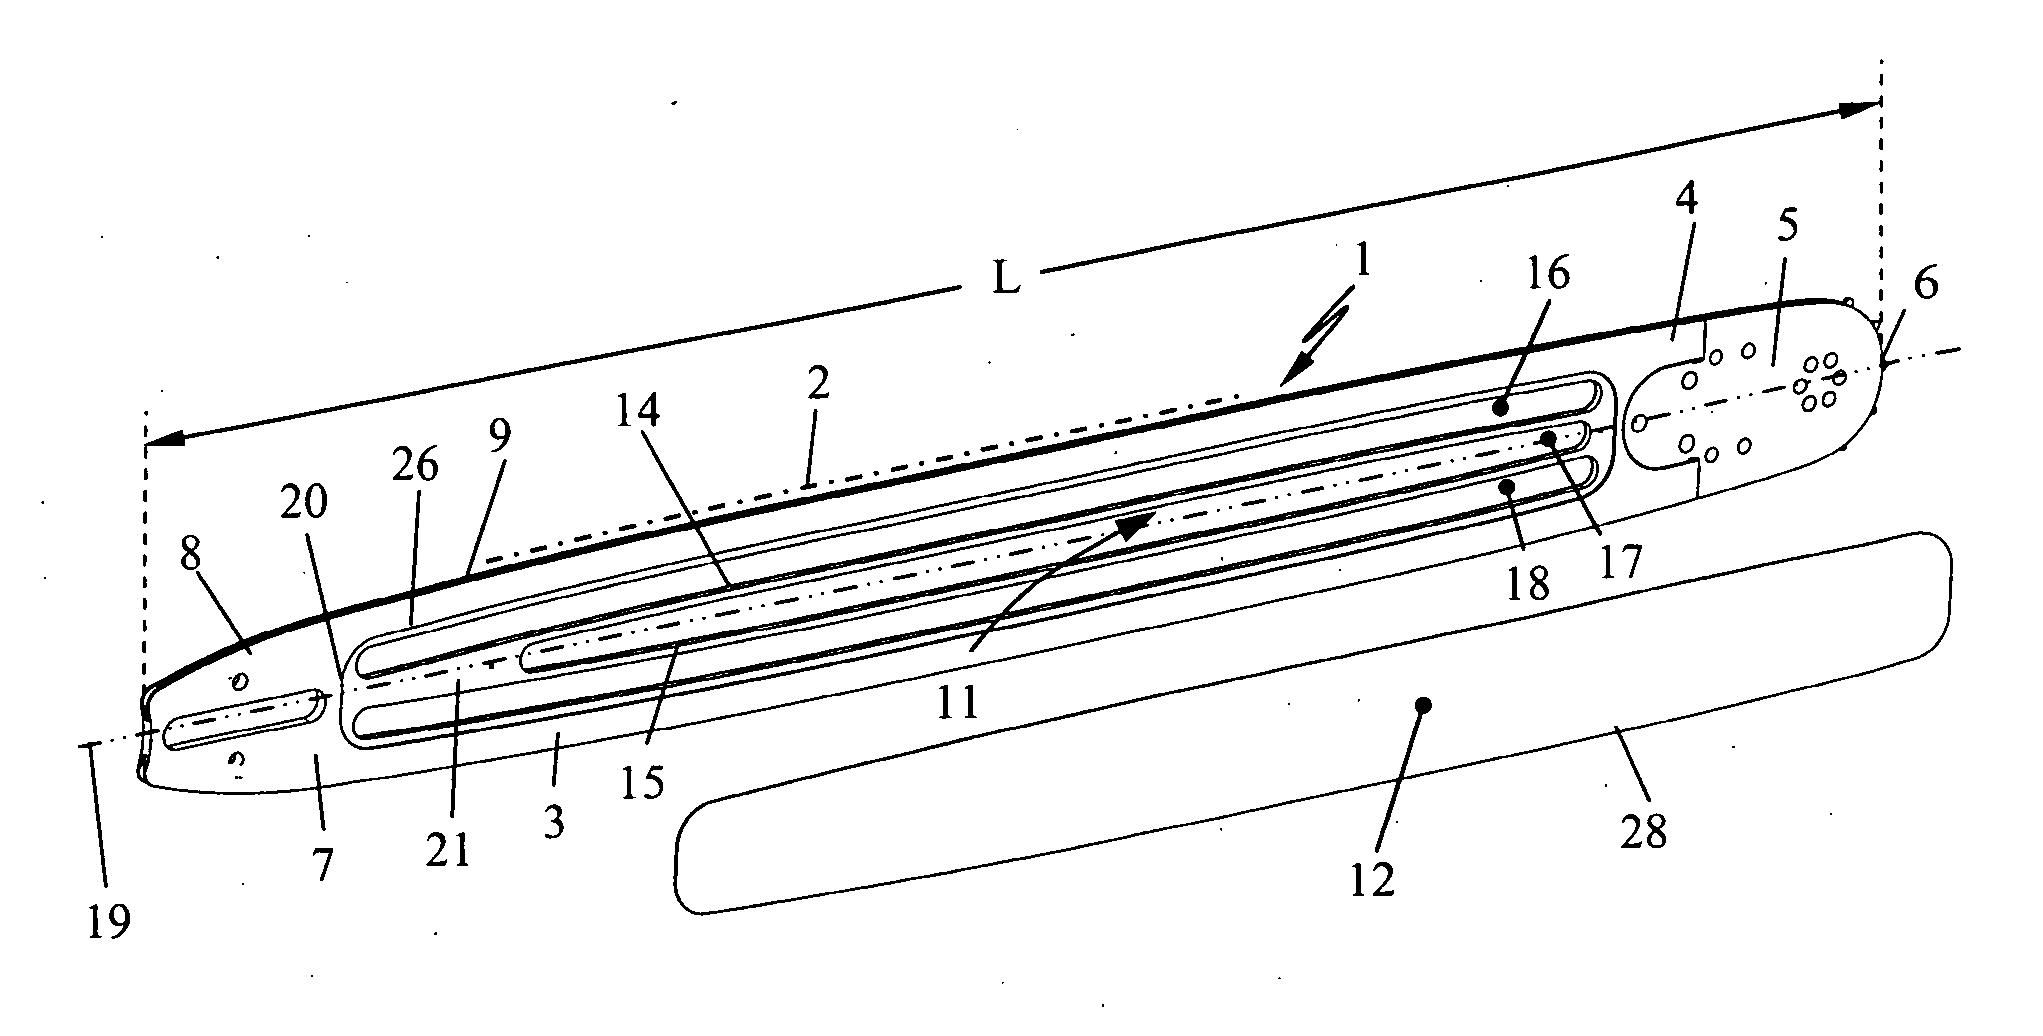 Weight-reduced guide bar of solid material